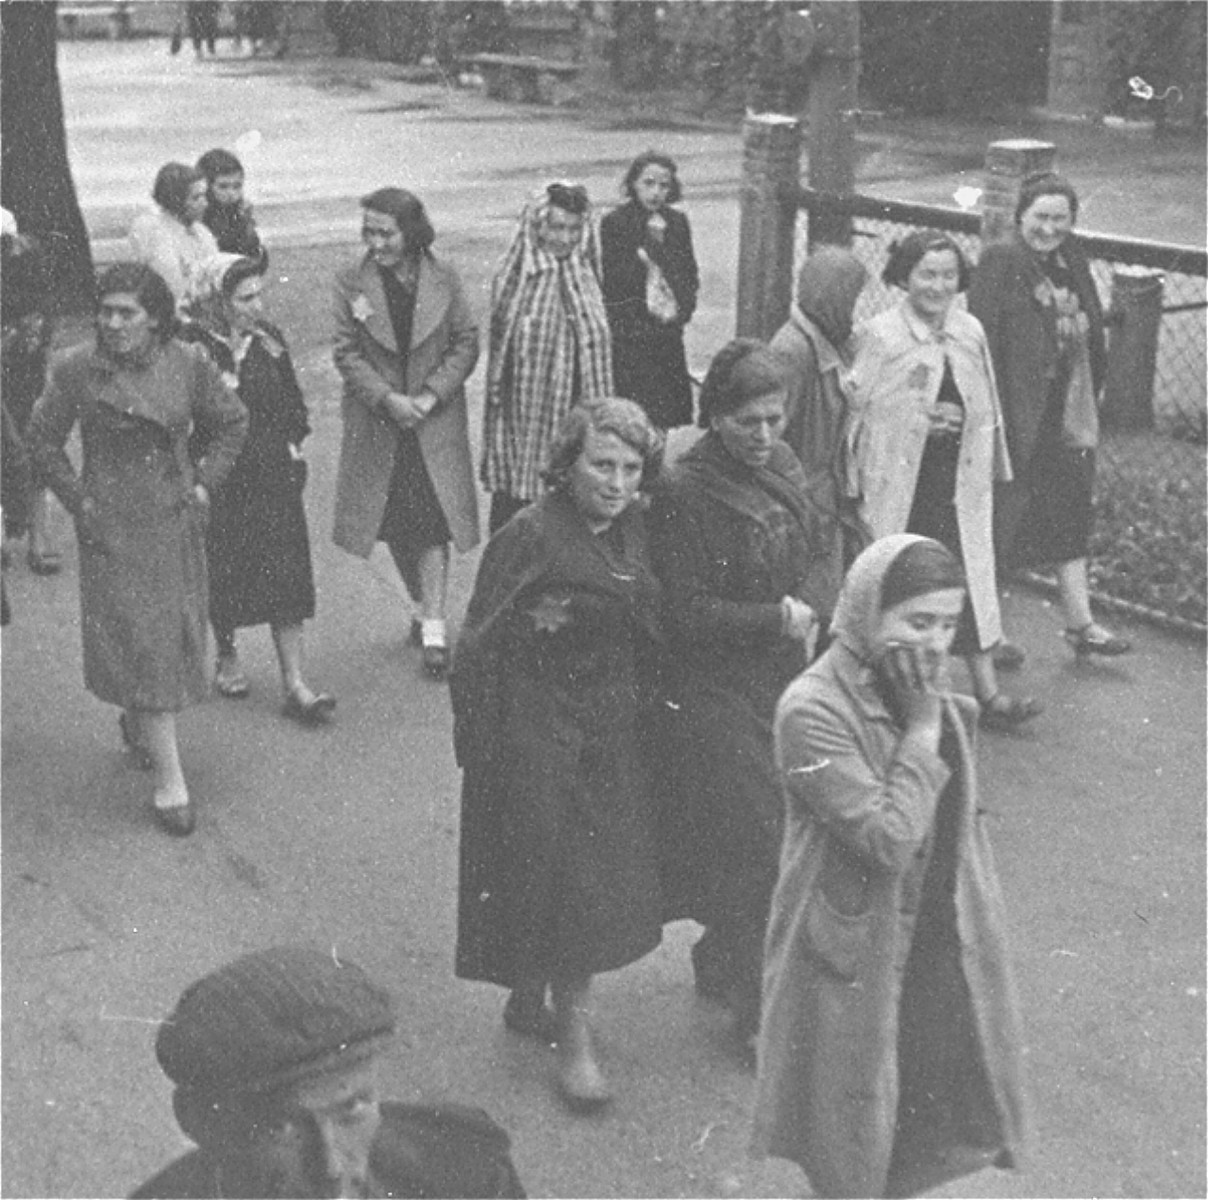 Jewish women wearing yellow stars are walking in the street, near a park. 

This photo was taken before the establishment of the ghetto.